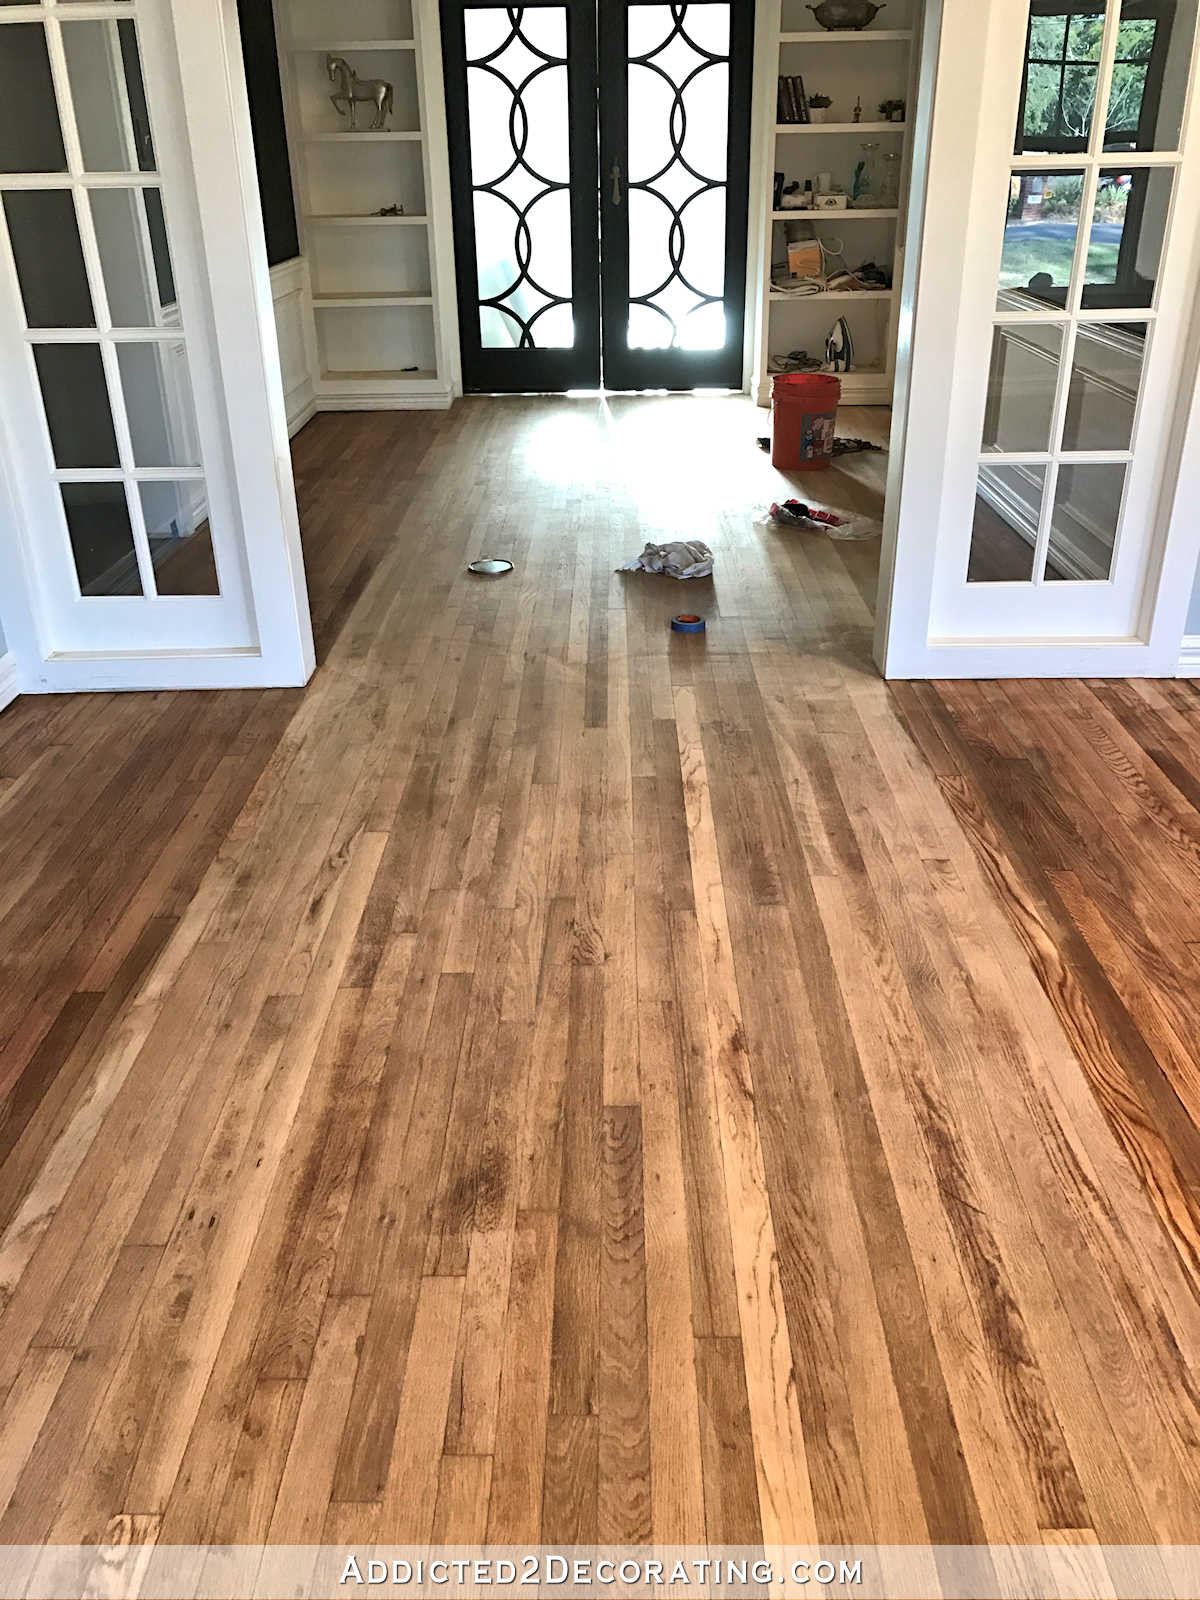 12 Perfect Hardwood Floor Refinishing In Tampa 2024 free download hardwood floor refinishing in tampa of how much to refinish wood floors gallery priory wood floor with regard to how much to refinish wood floors adventures in staining my red oak hardwood f